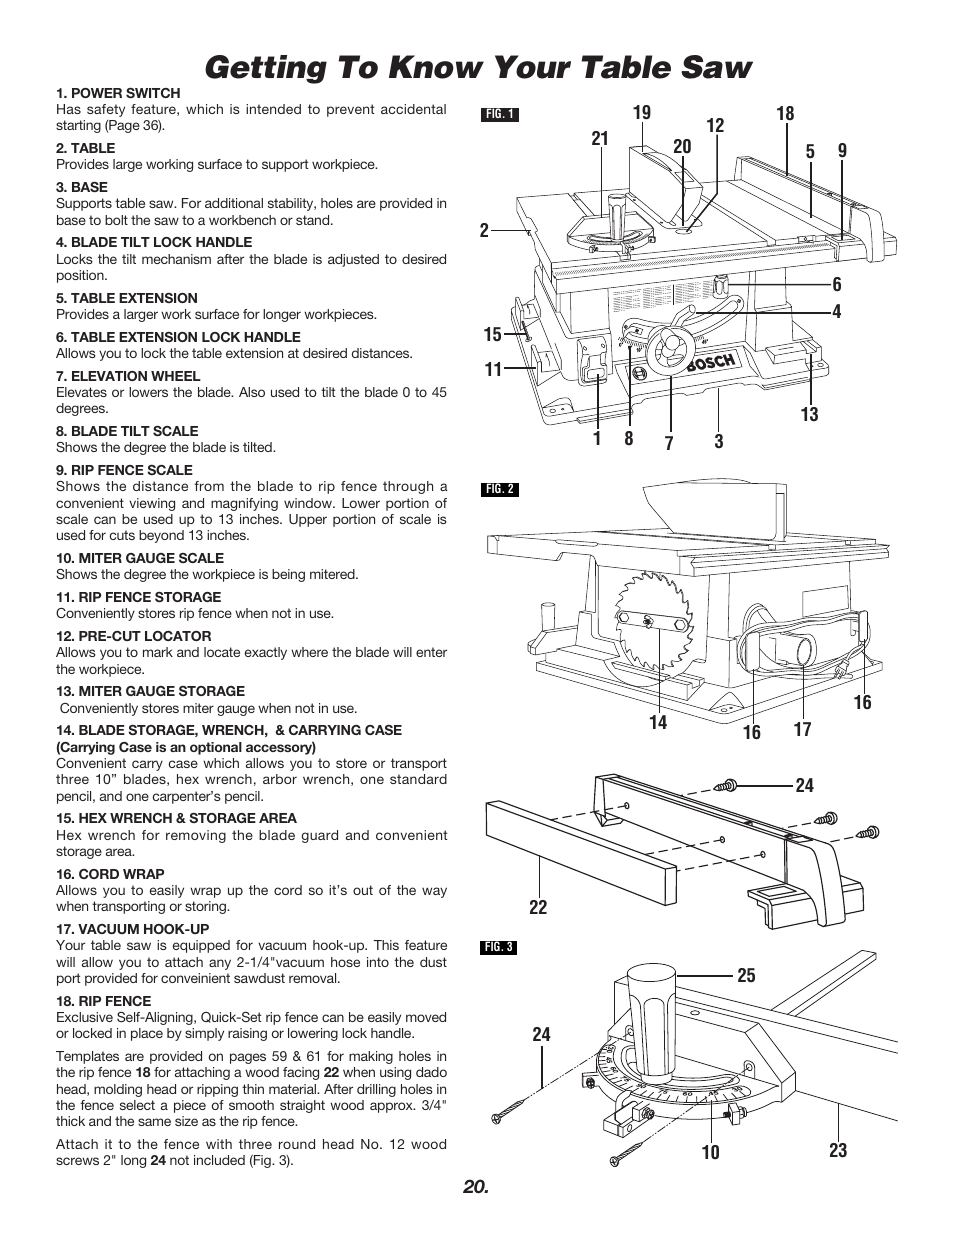 Getting to know your table saw | Bosch 4000 User Manual | Page 20 / 68 |  Original mode